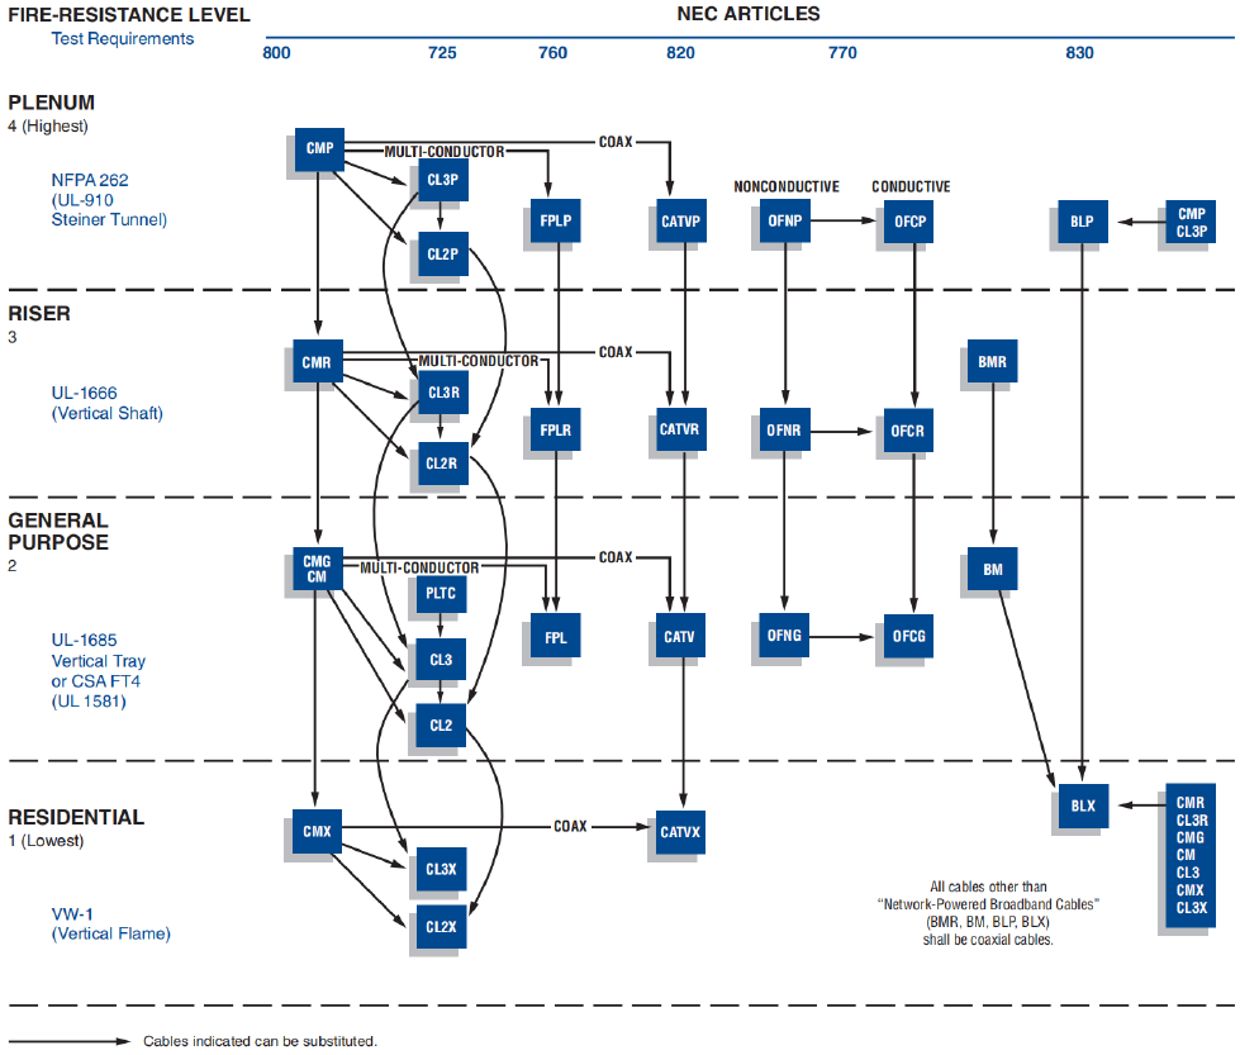 Cable Substitution Chart